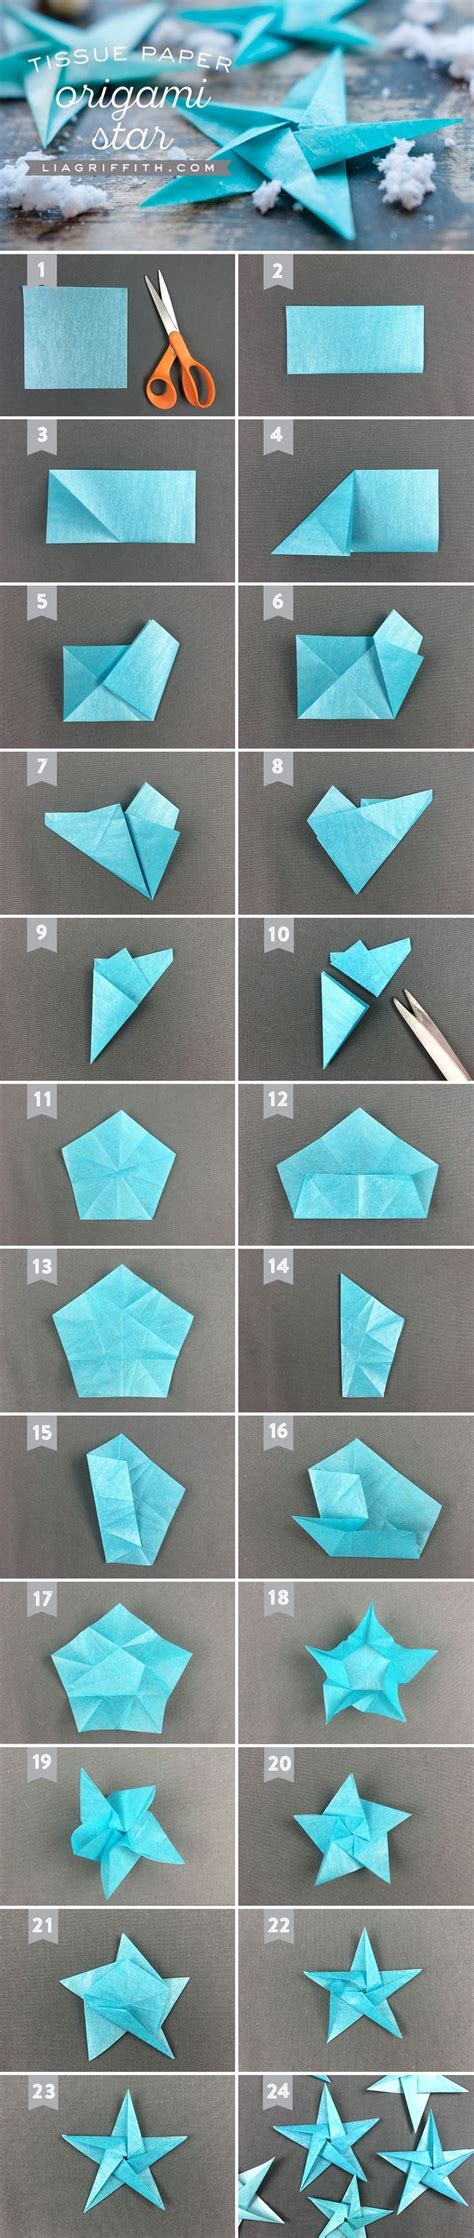 Follow these easy instructions for making a dress from a dollar bill. Tissue Star Origami Christmas Ornaments | Origami ...